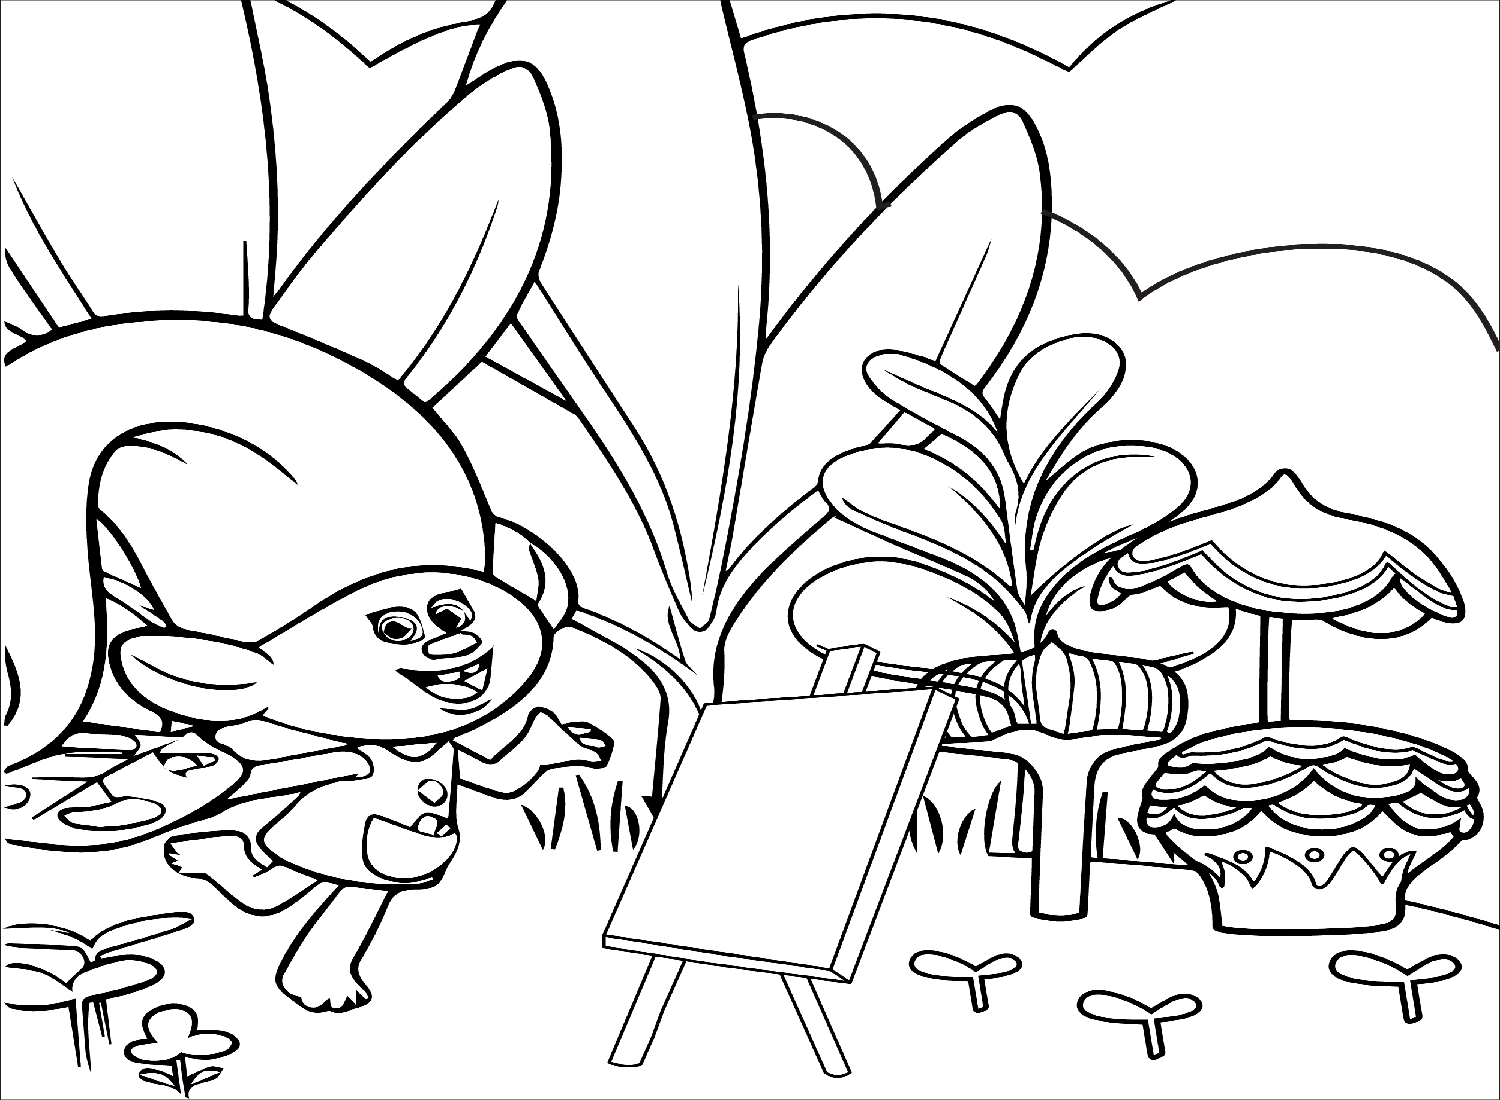 Trolls World Tour Film Coloring Pages